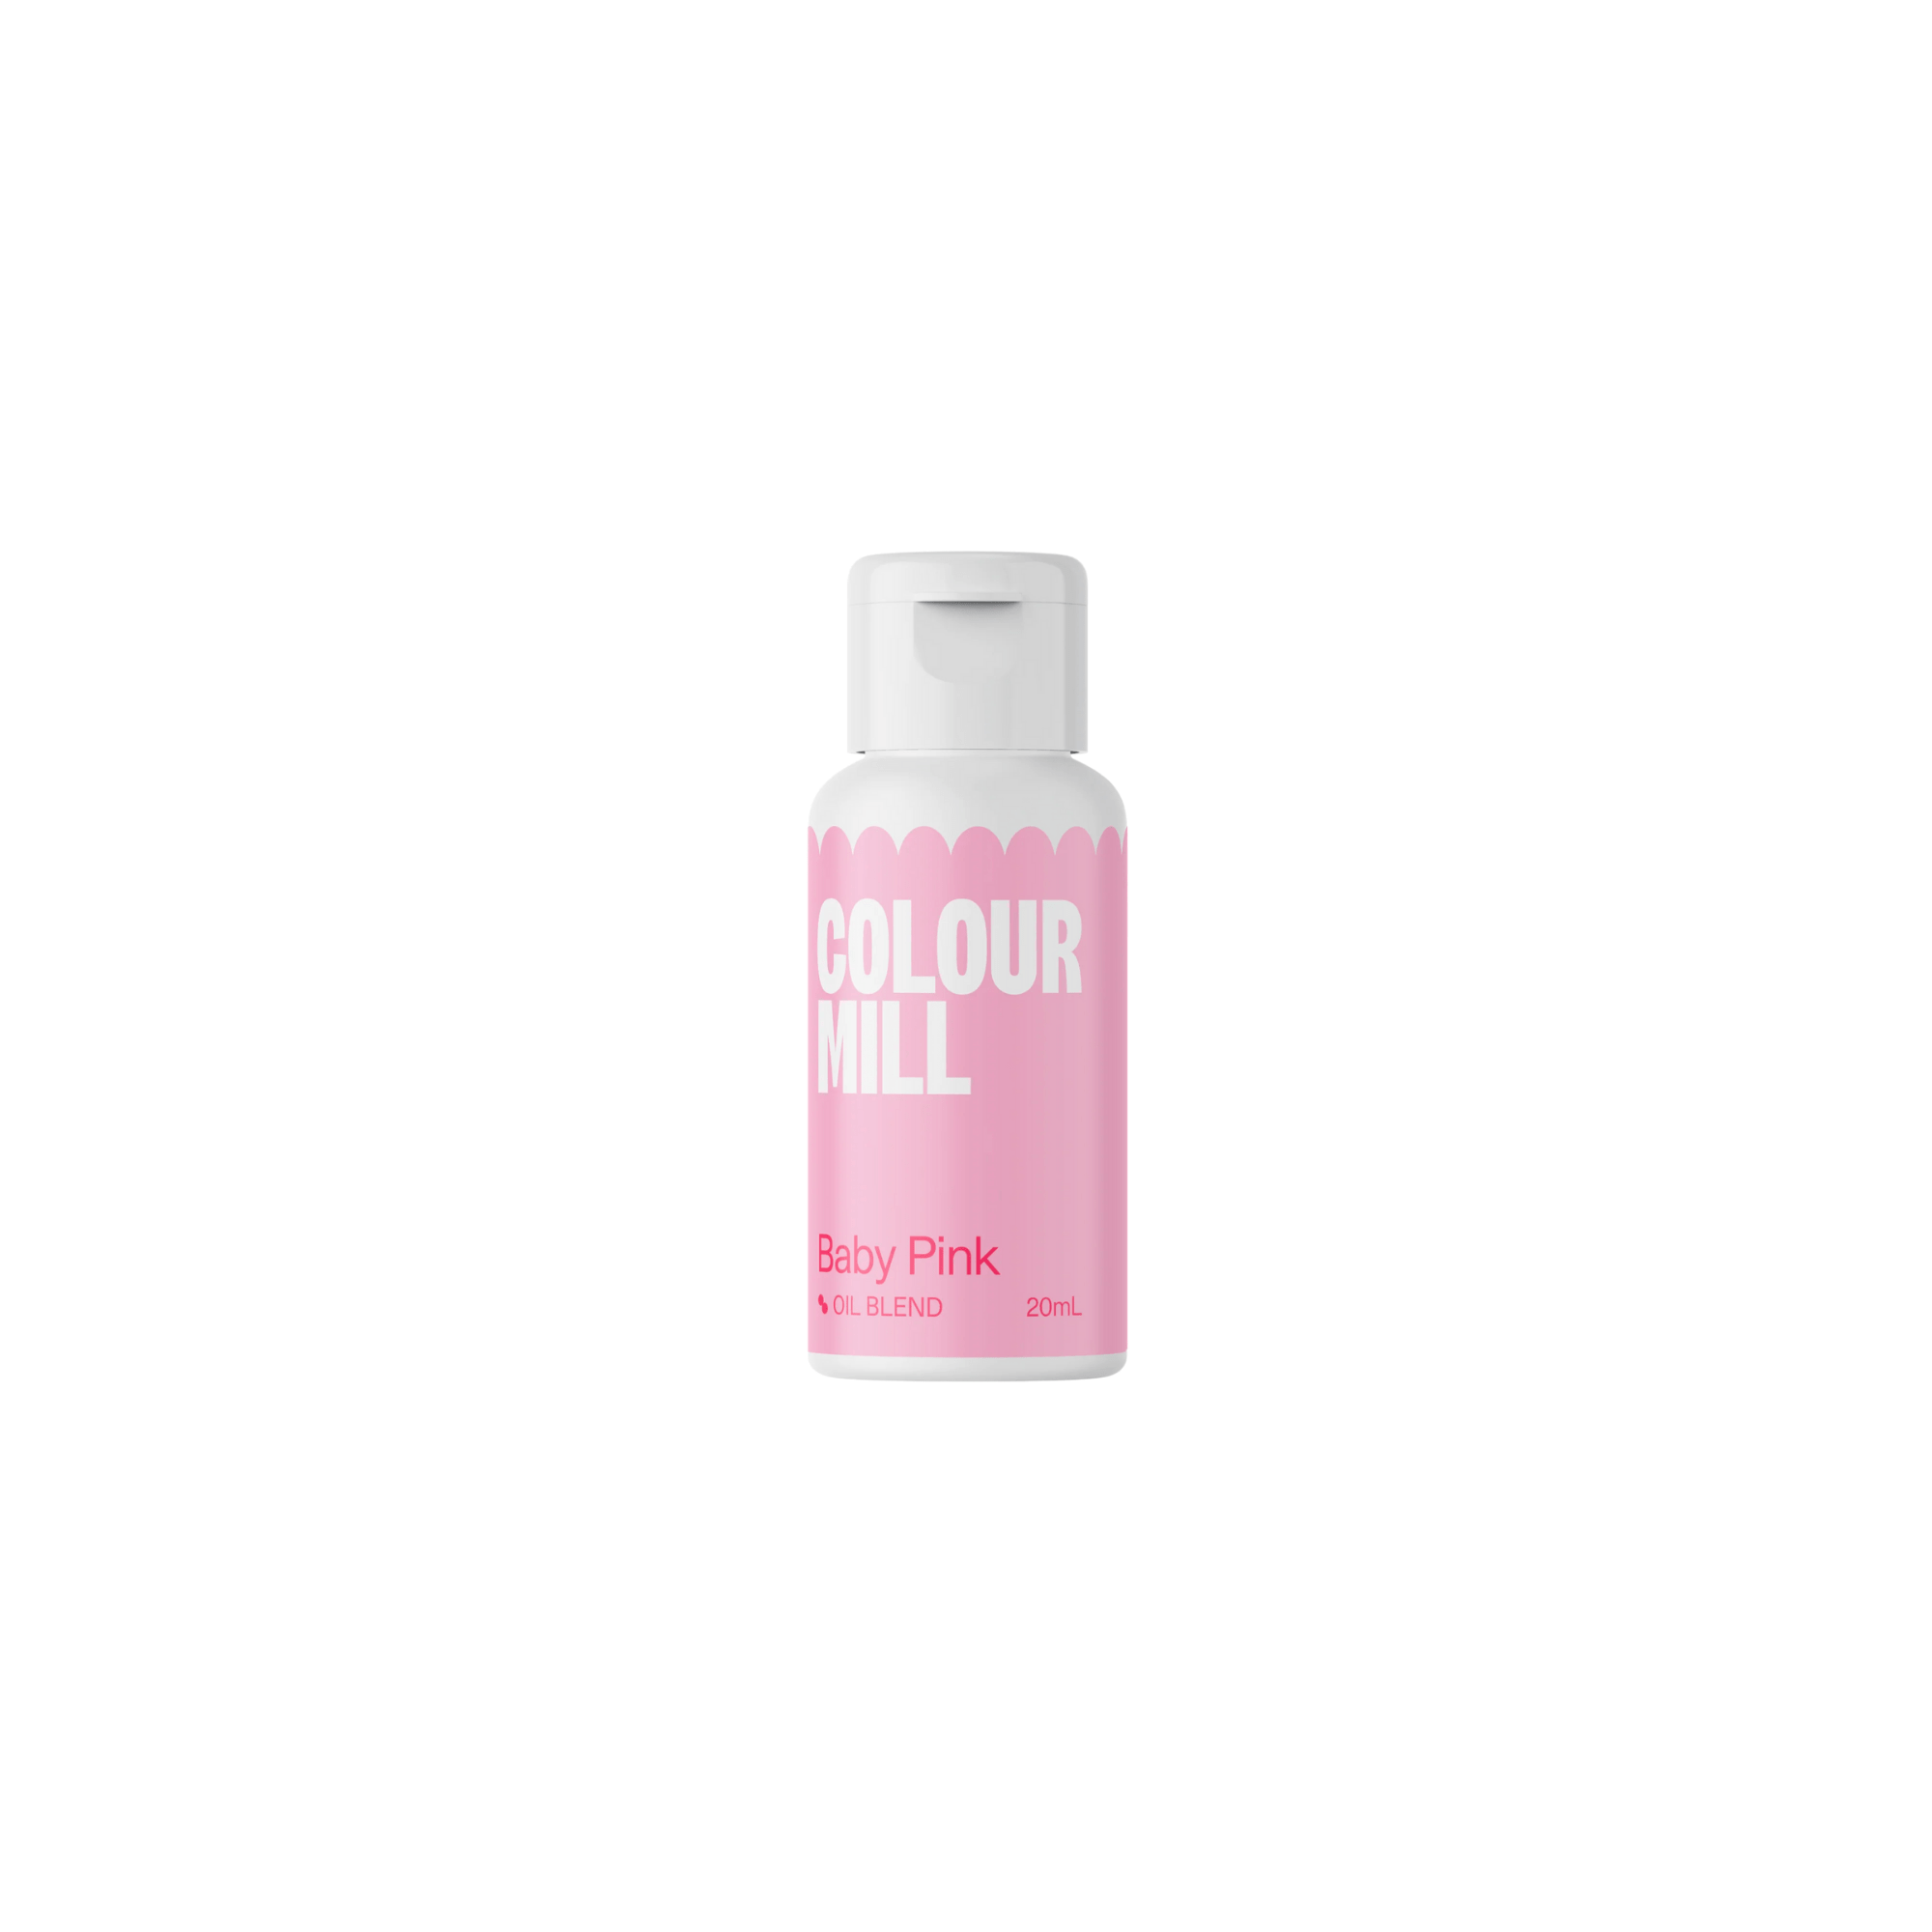 Happy Sprinkles Streusel 20ml Colour Mill Baby Pink - Oil Blend